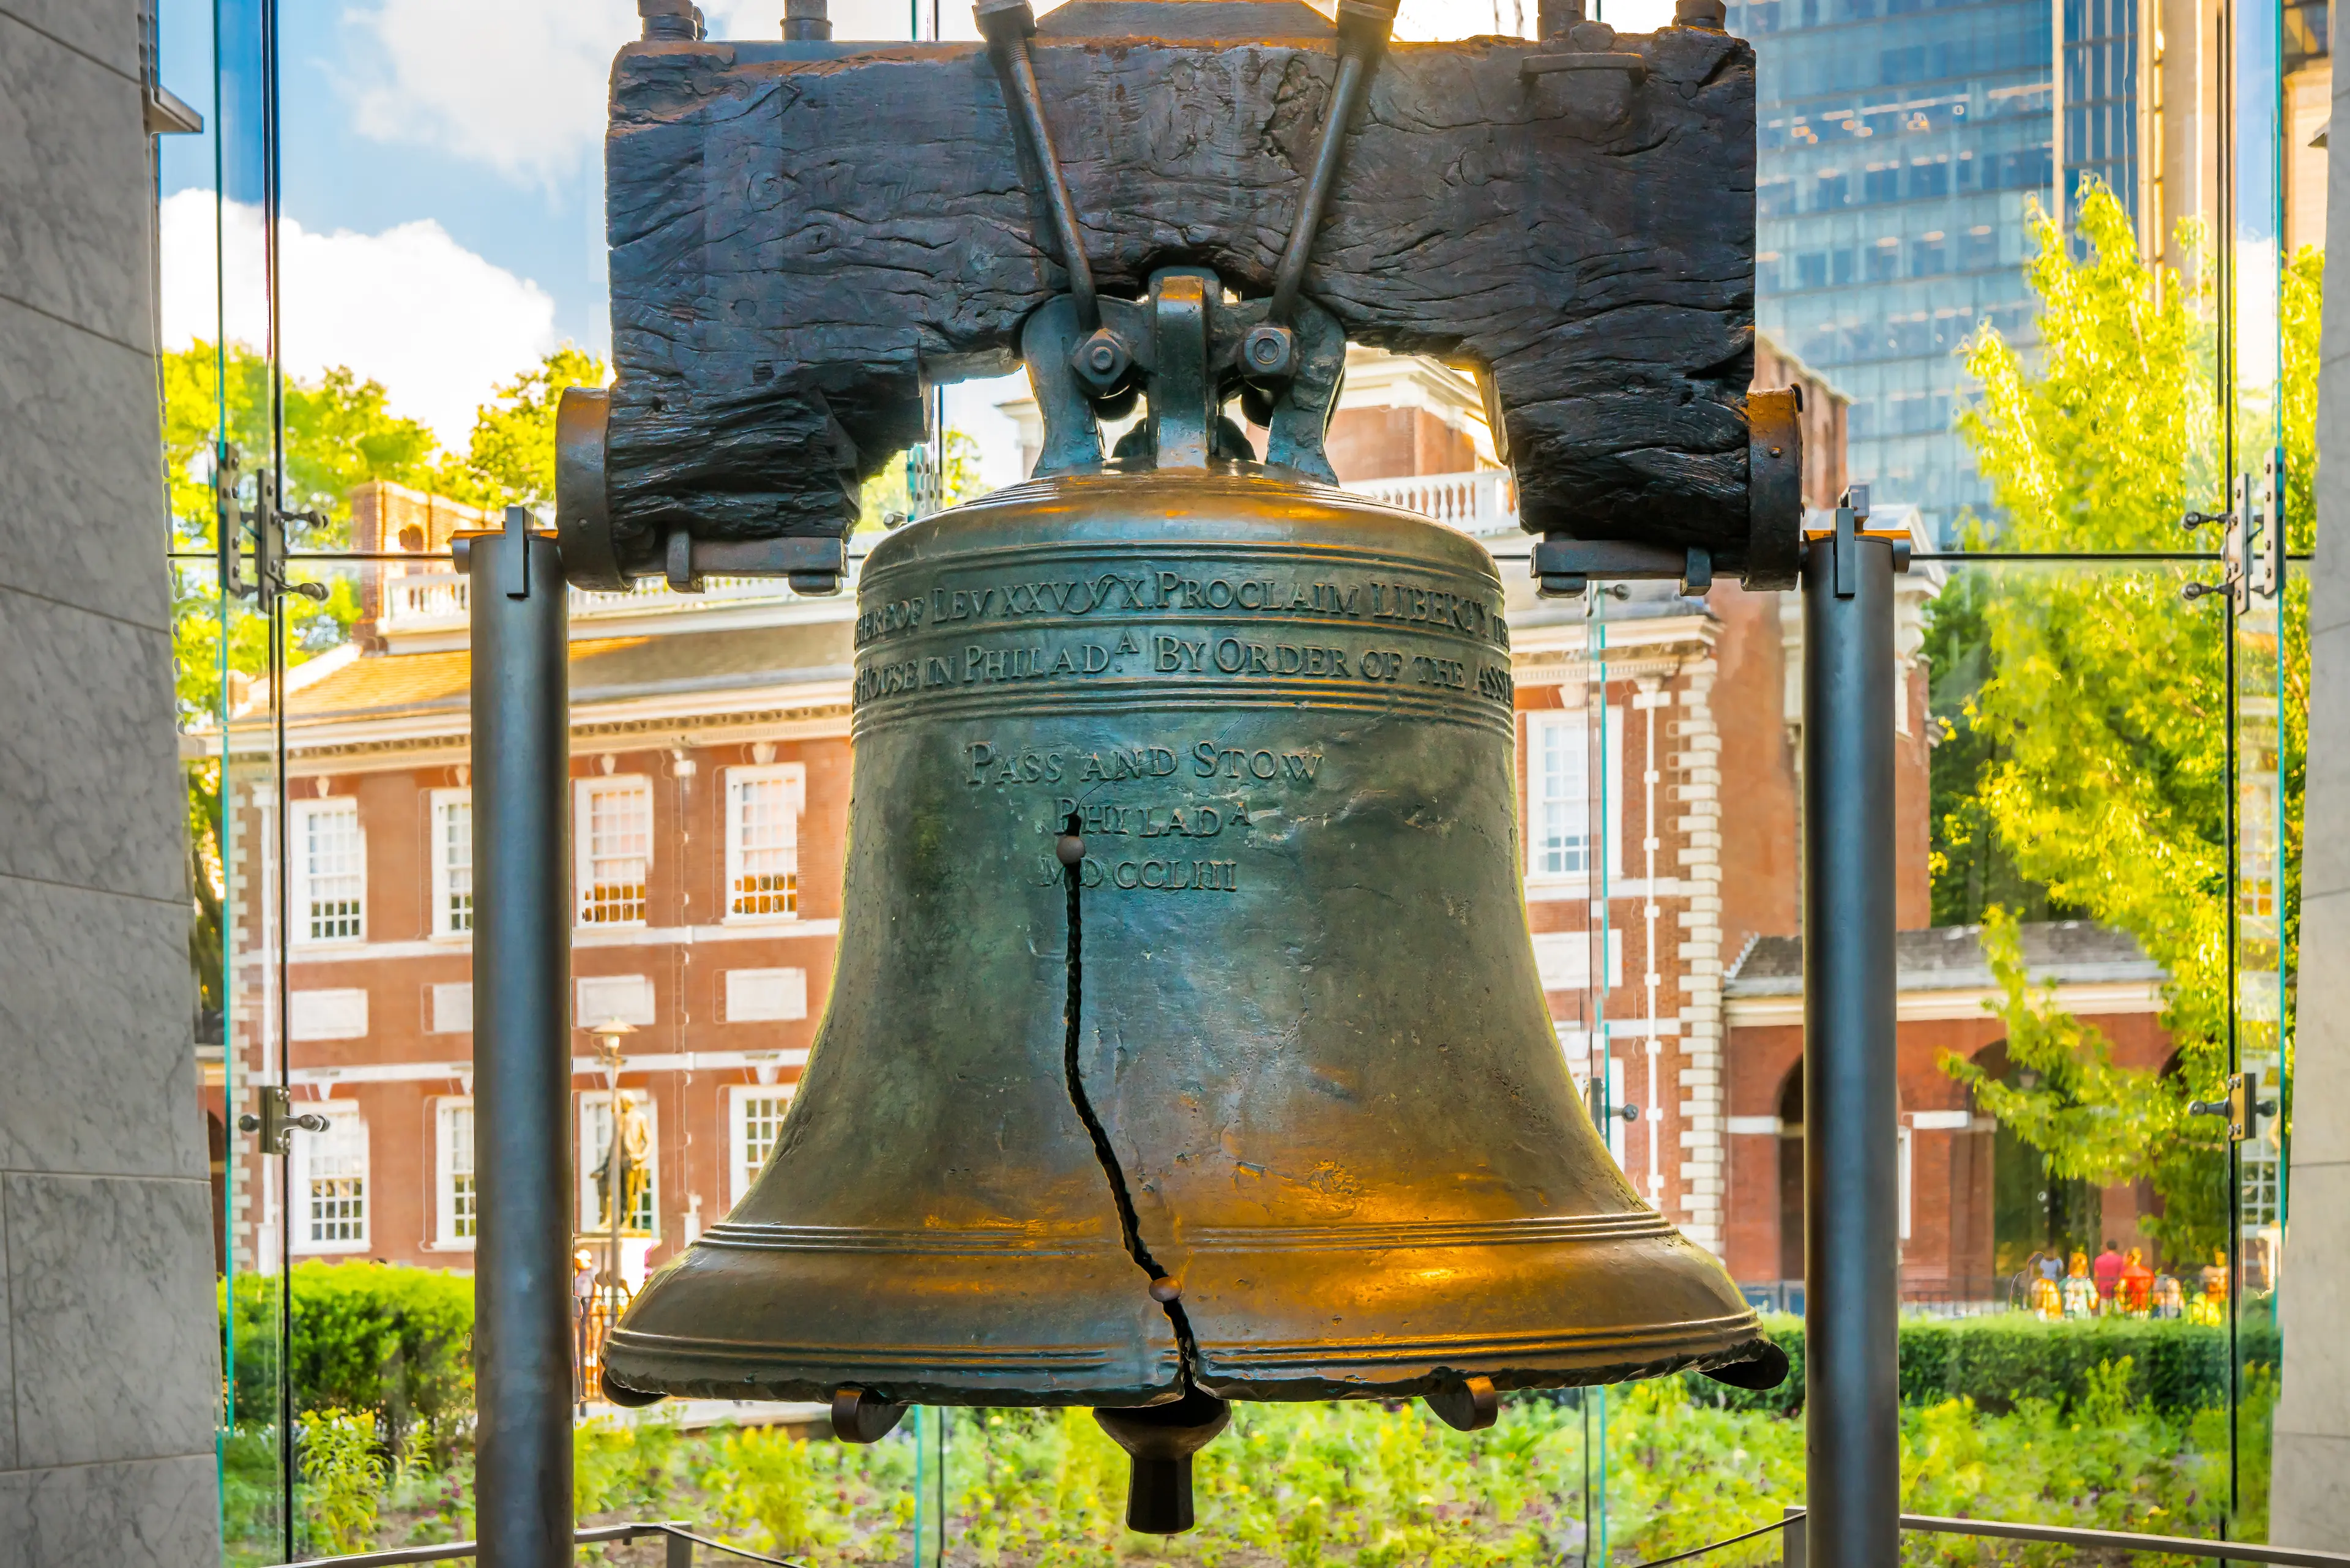 Liberty Bell in Independence National Historical Park